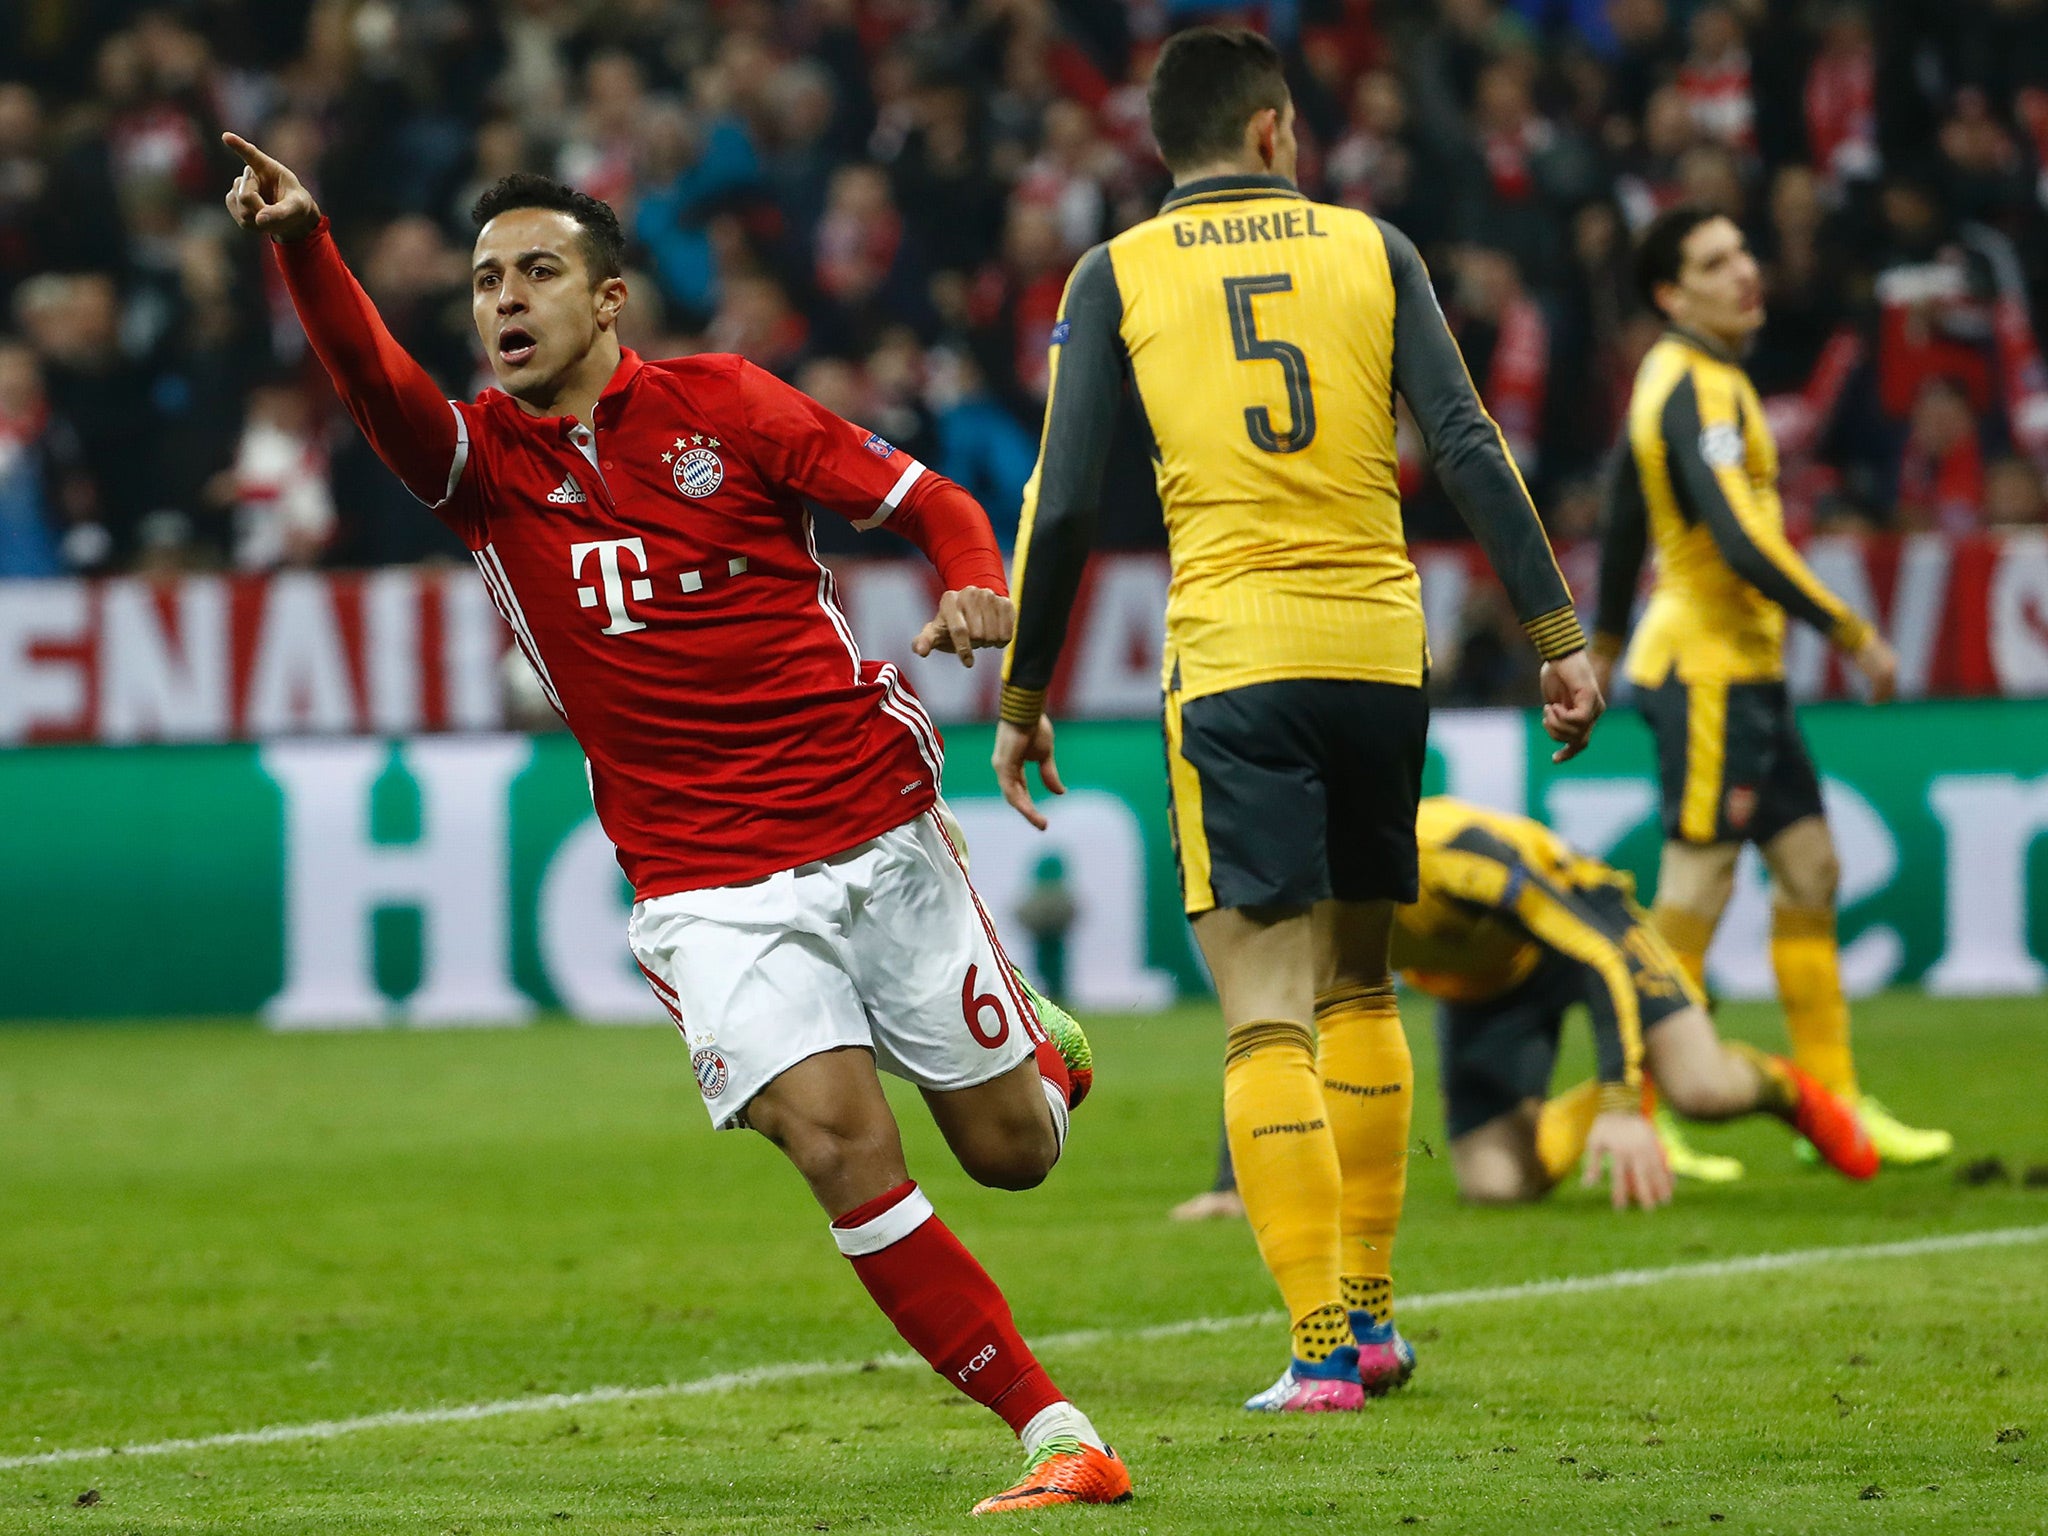 Thiago scored twice in quick succession to take the tie away from Arsenal